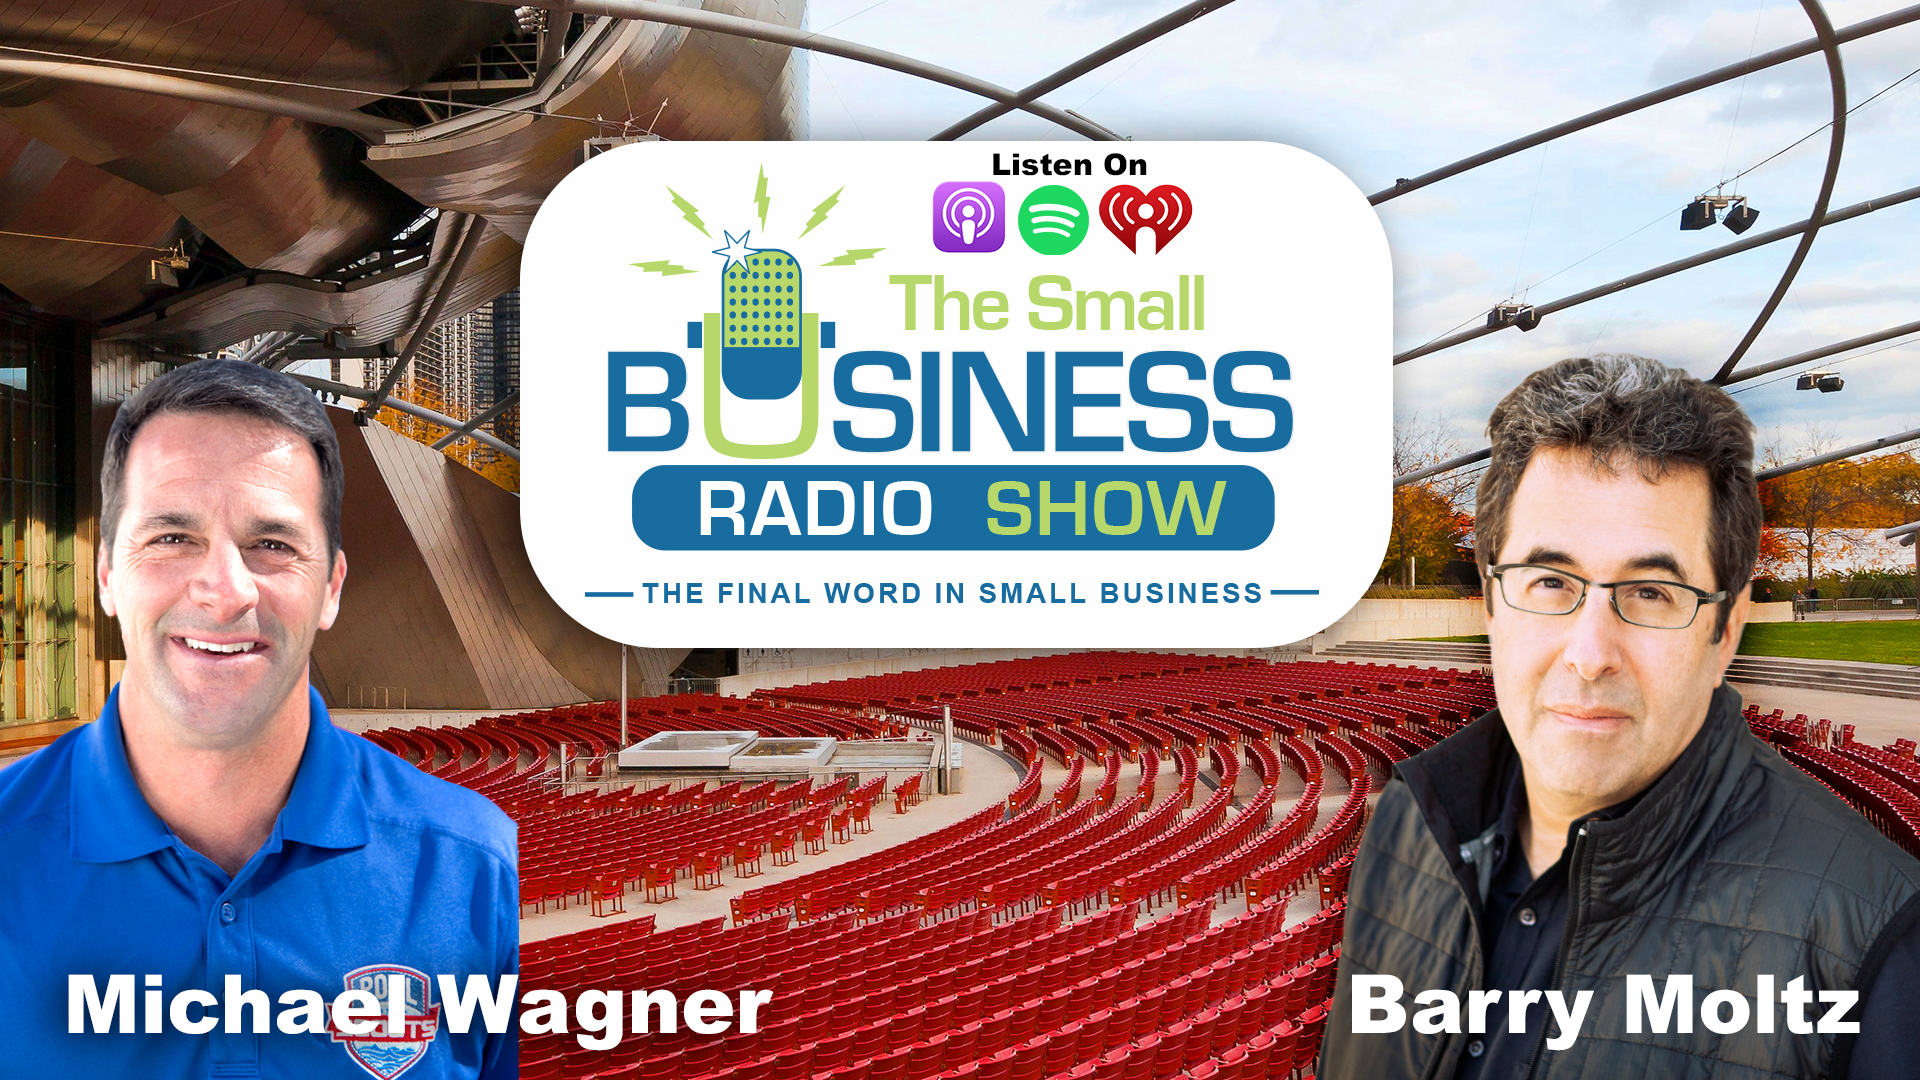 Michael Wagner on The Small Business Radio Show